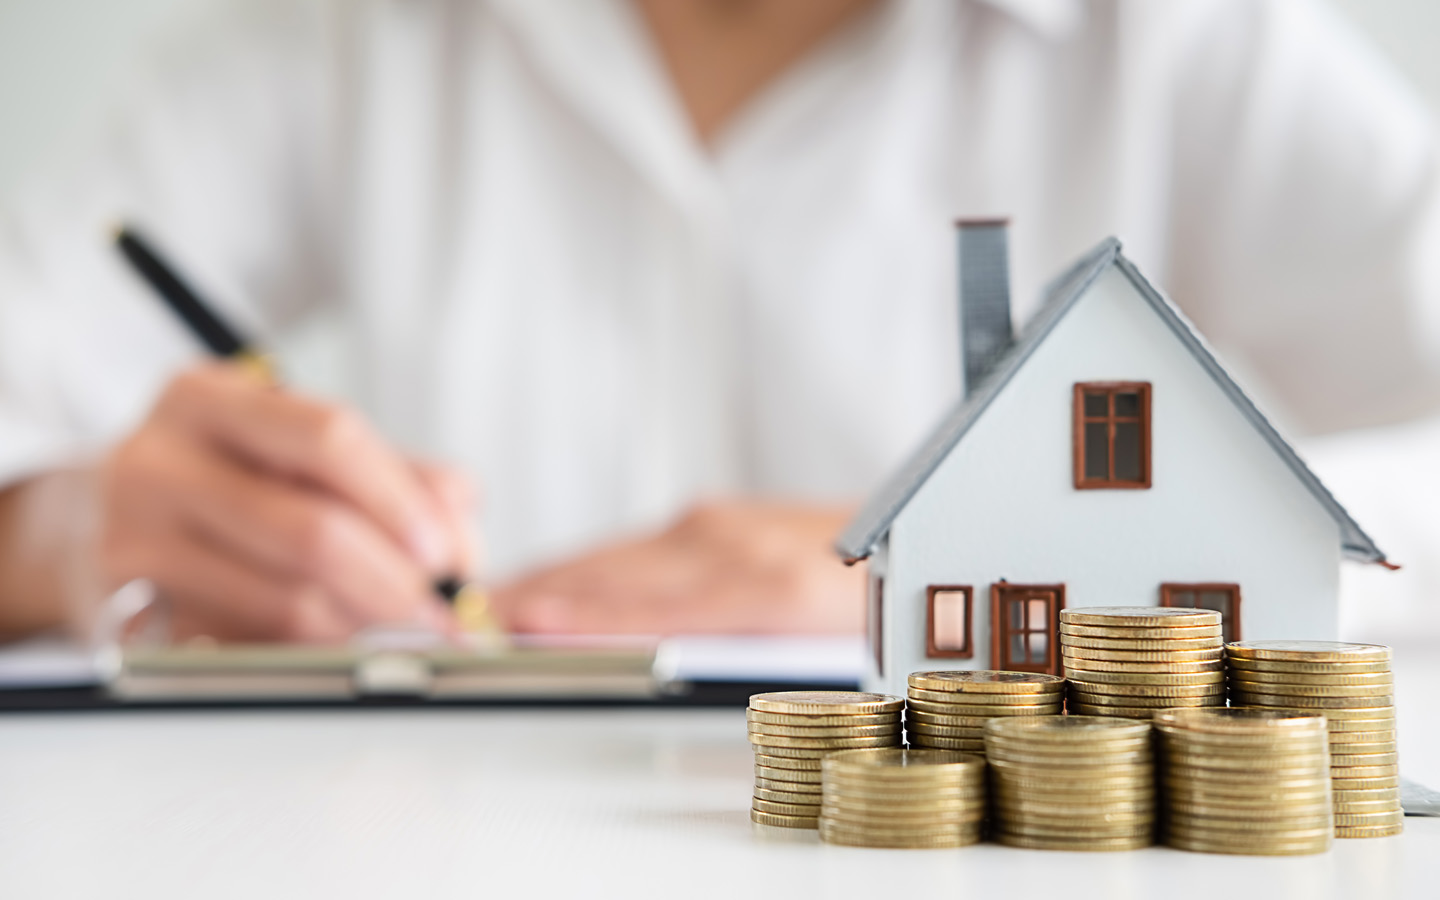 woman signing house buying contract with house model and coins on table